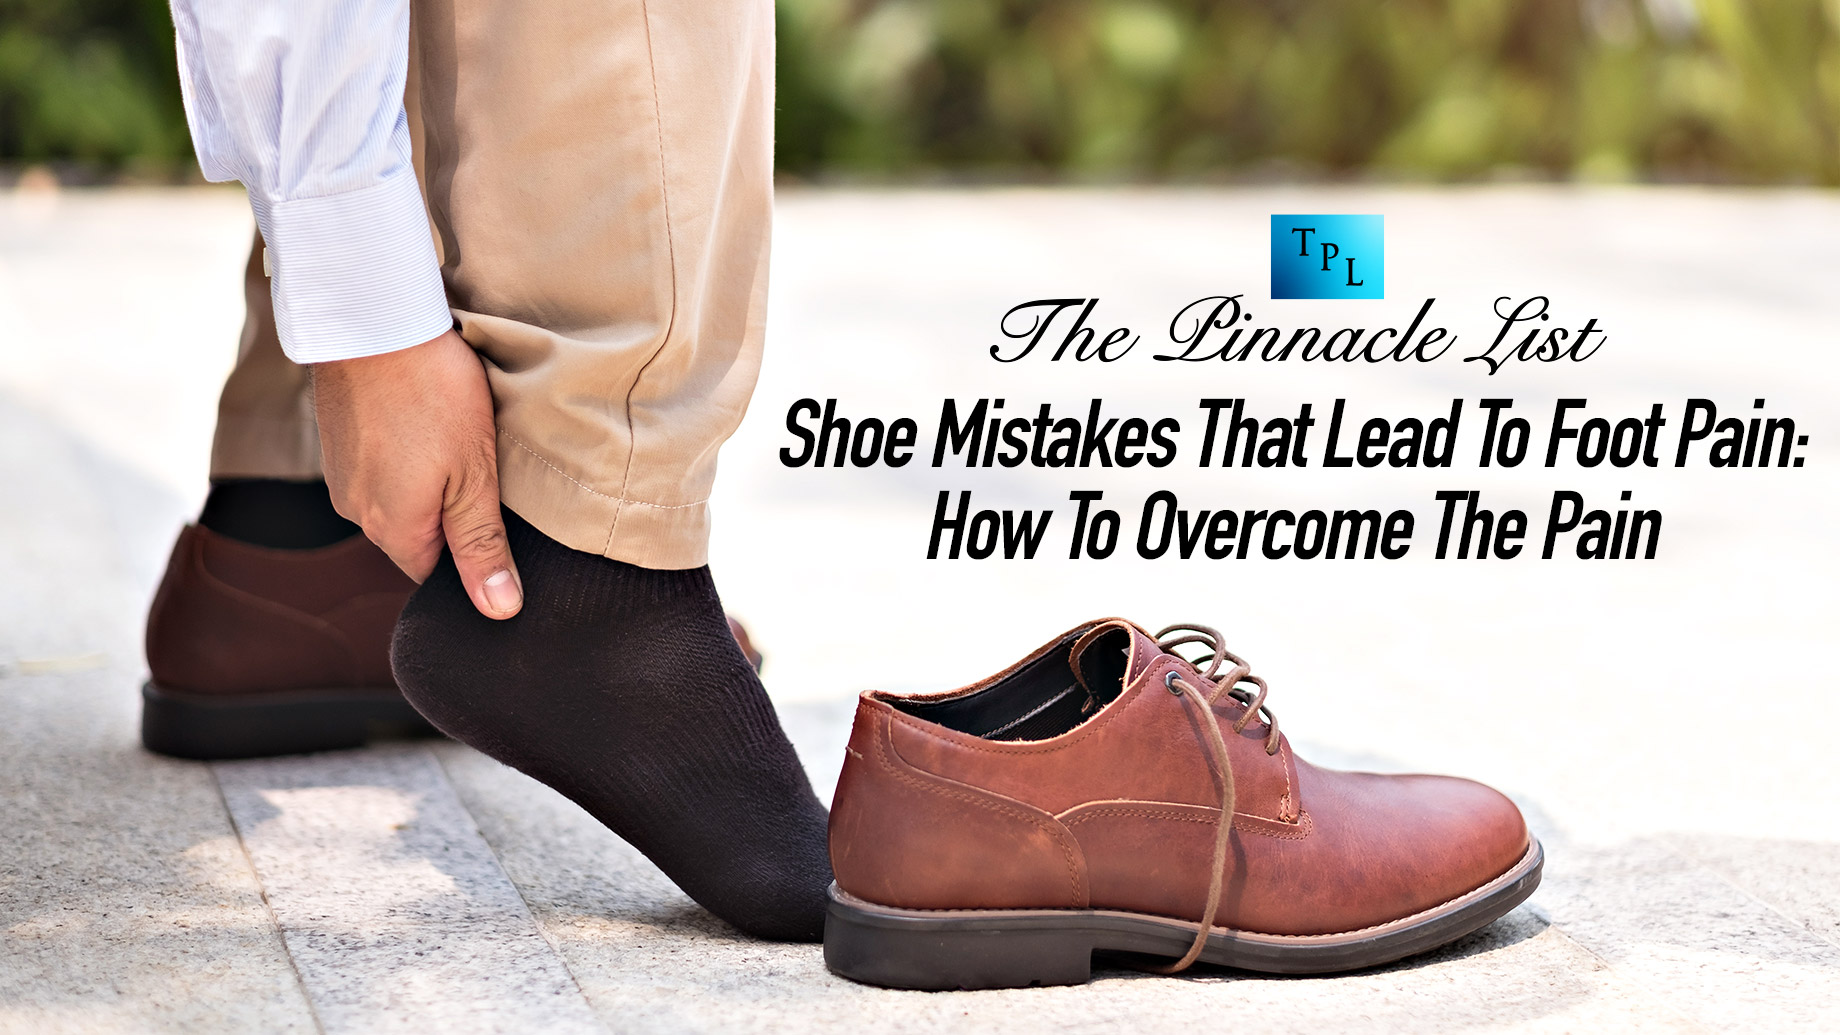 Shoe Mistakes That Lead To Foot Pain - How To Overcome The Pain